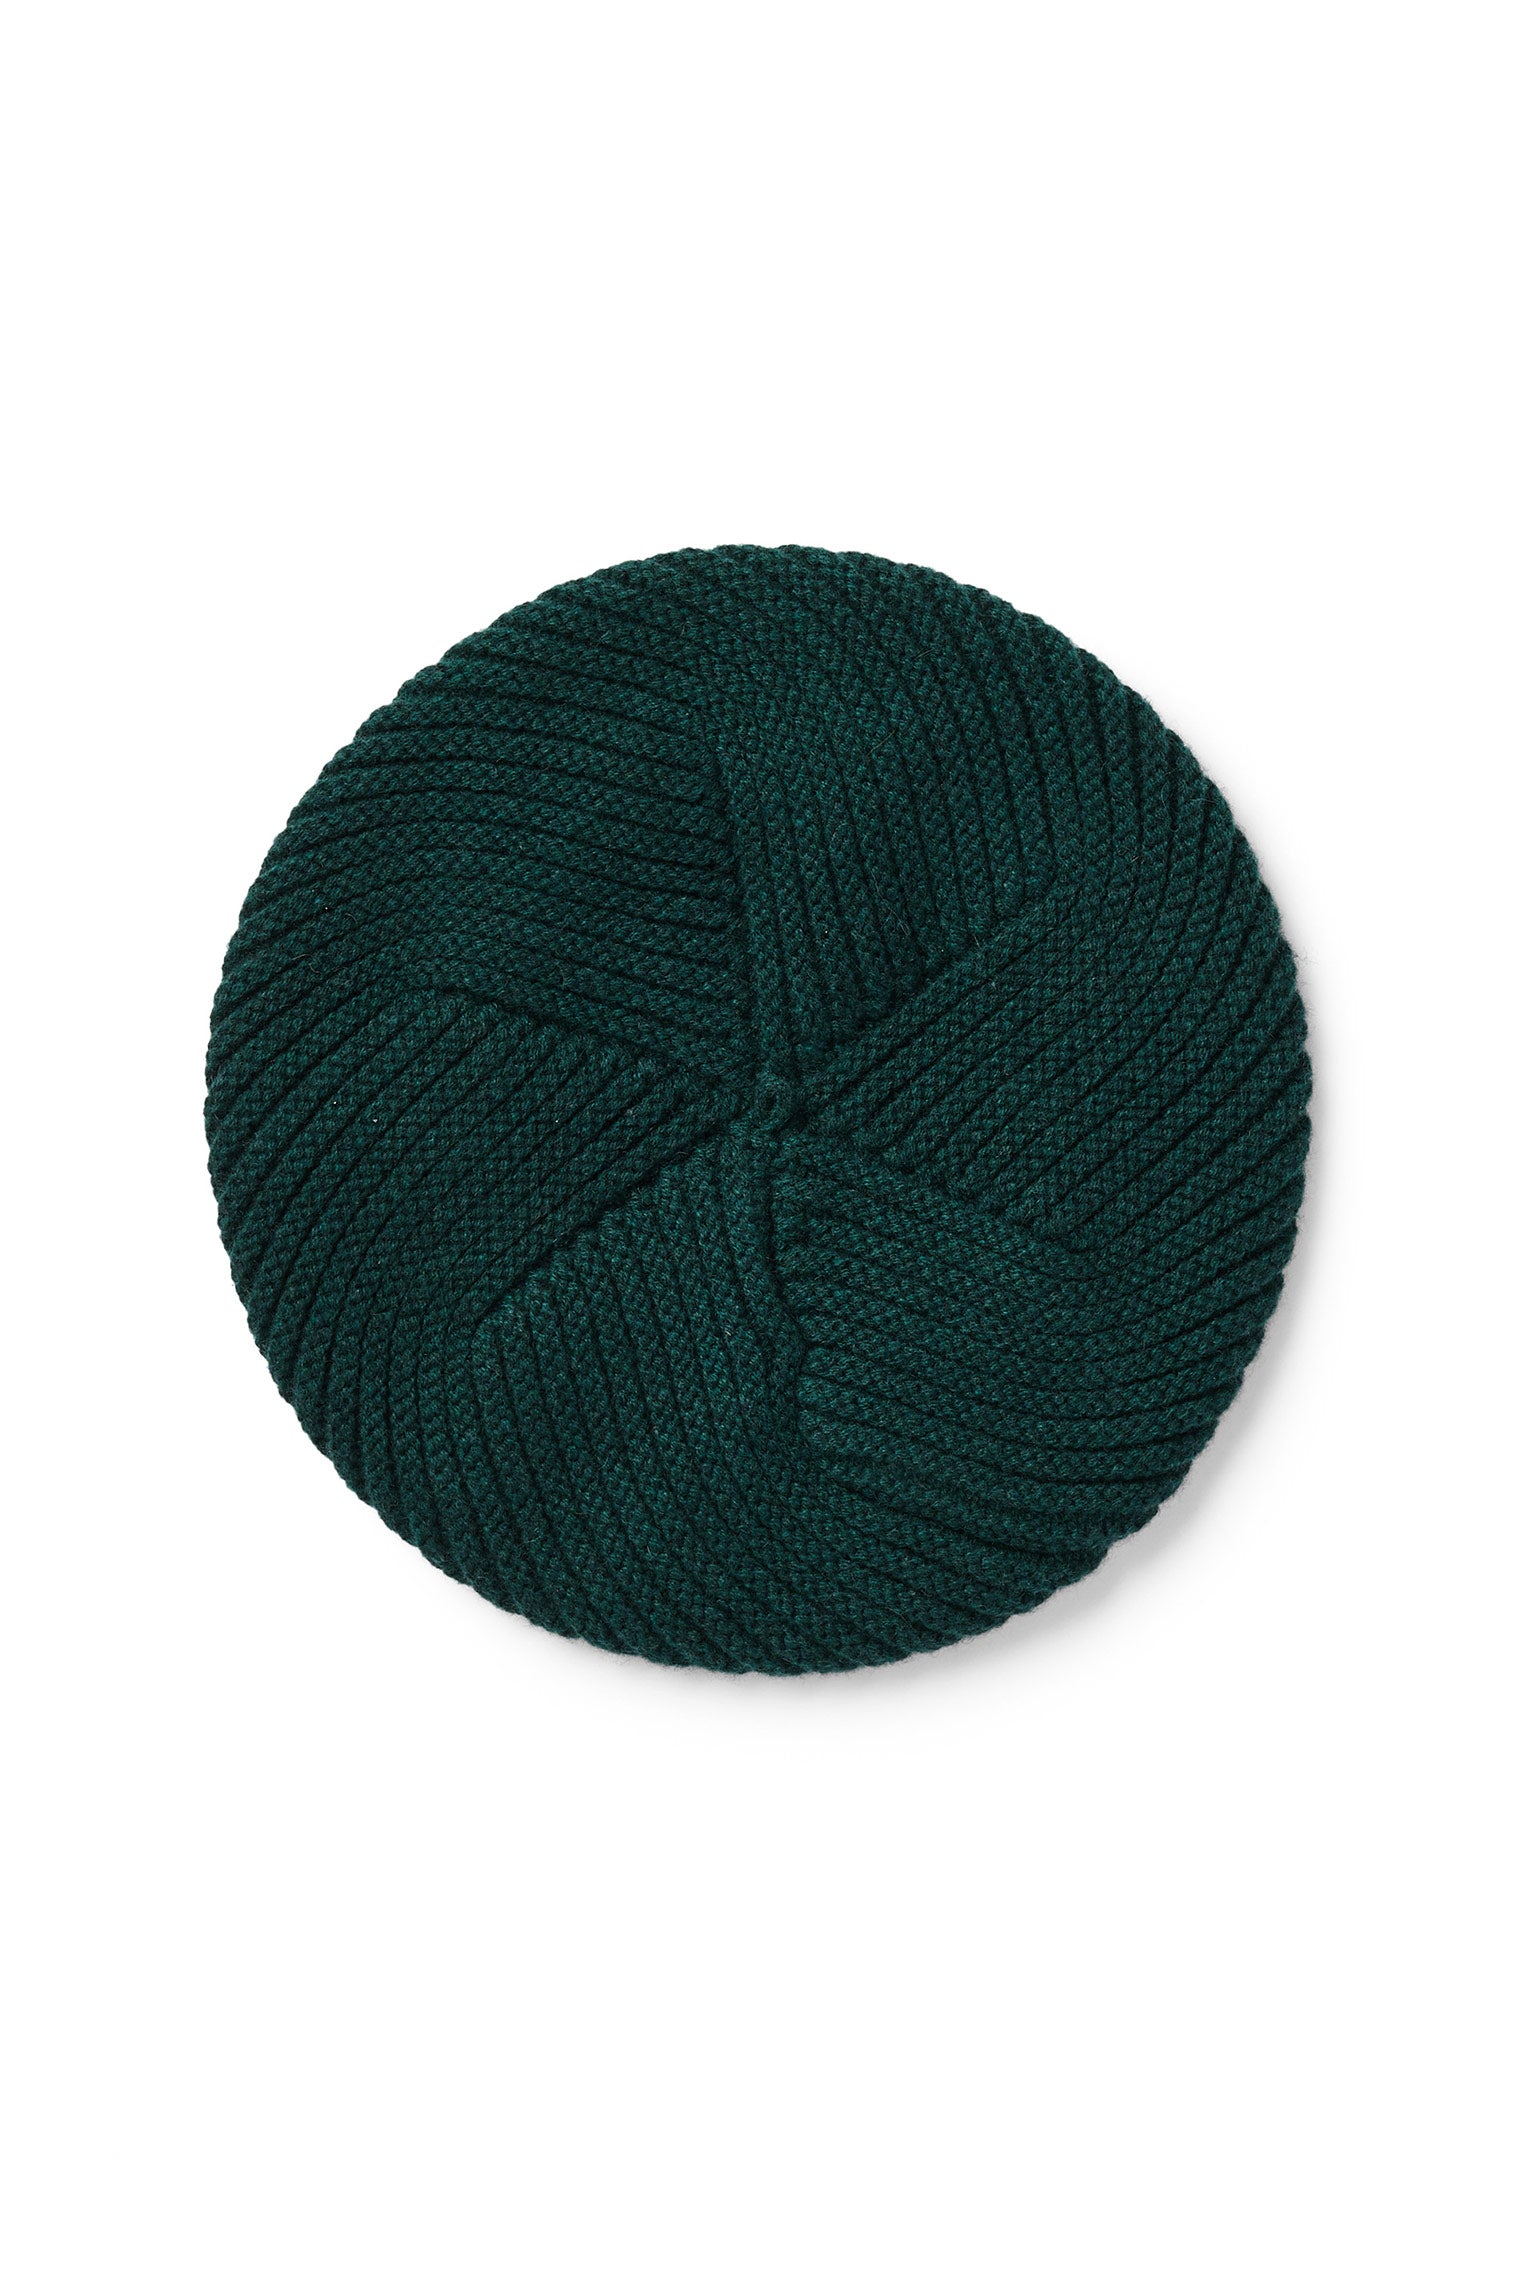 Green Knitted Cashmere Beret - Women's Berets - Lock & Co. Hatters London UK